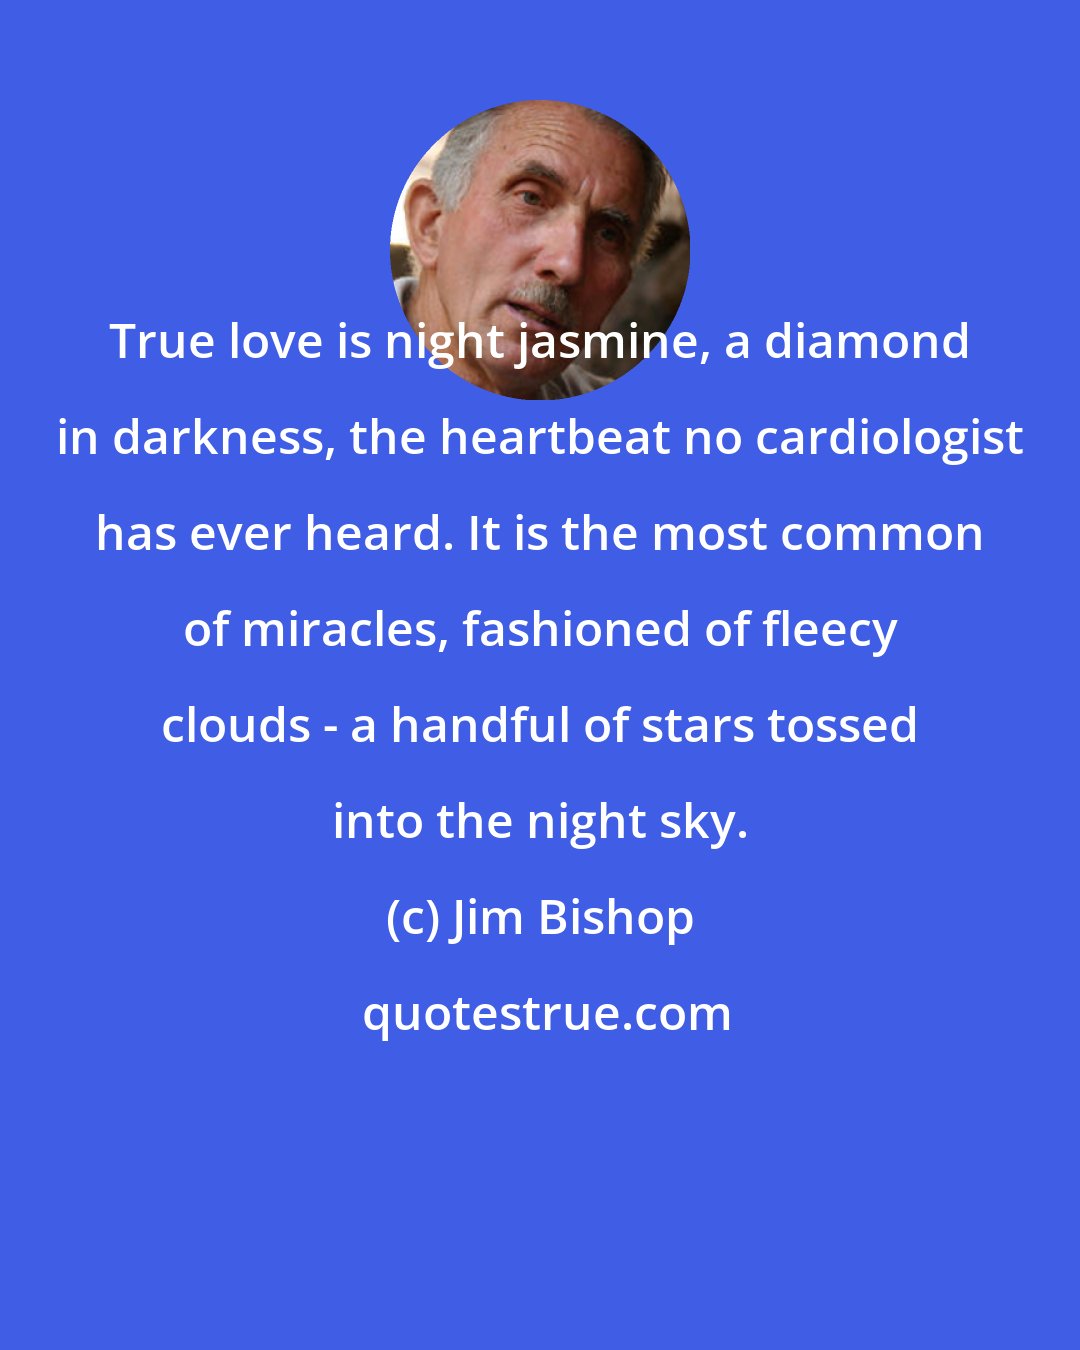 Jim Bishop: True love is night jasmine, a diamond in darkness, the heartbeat no cardiologist has ever heard. It is the most common of miracles, fashioned of fleecy clouds - a handful of stars tossed into the night sky.